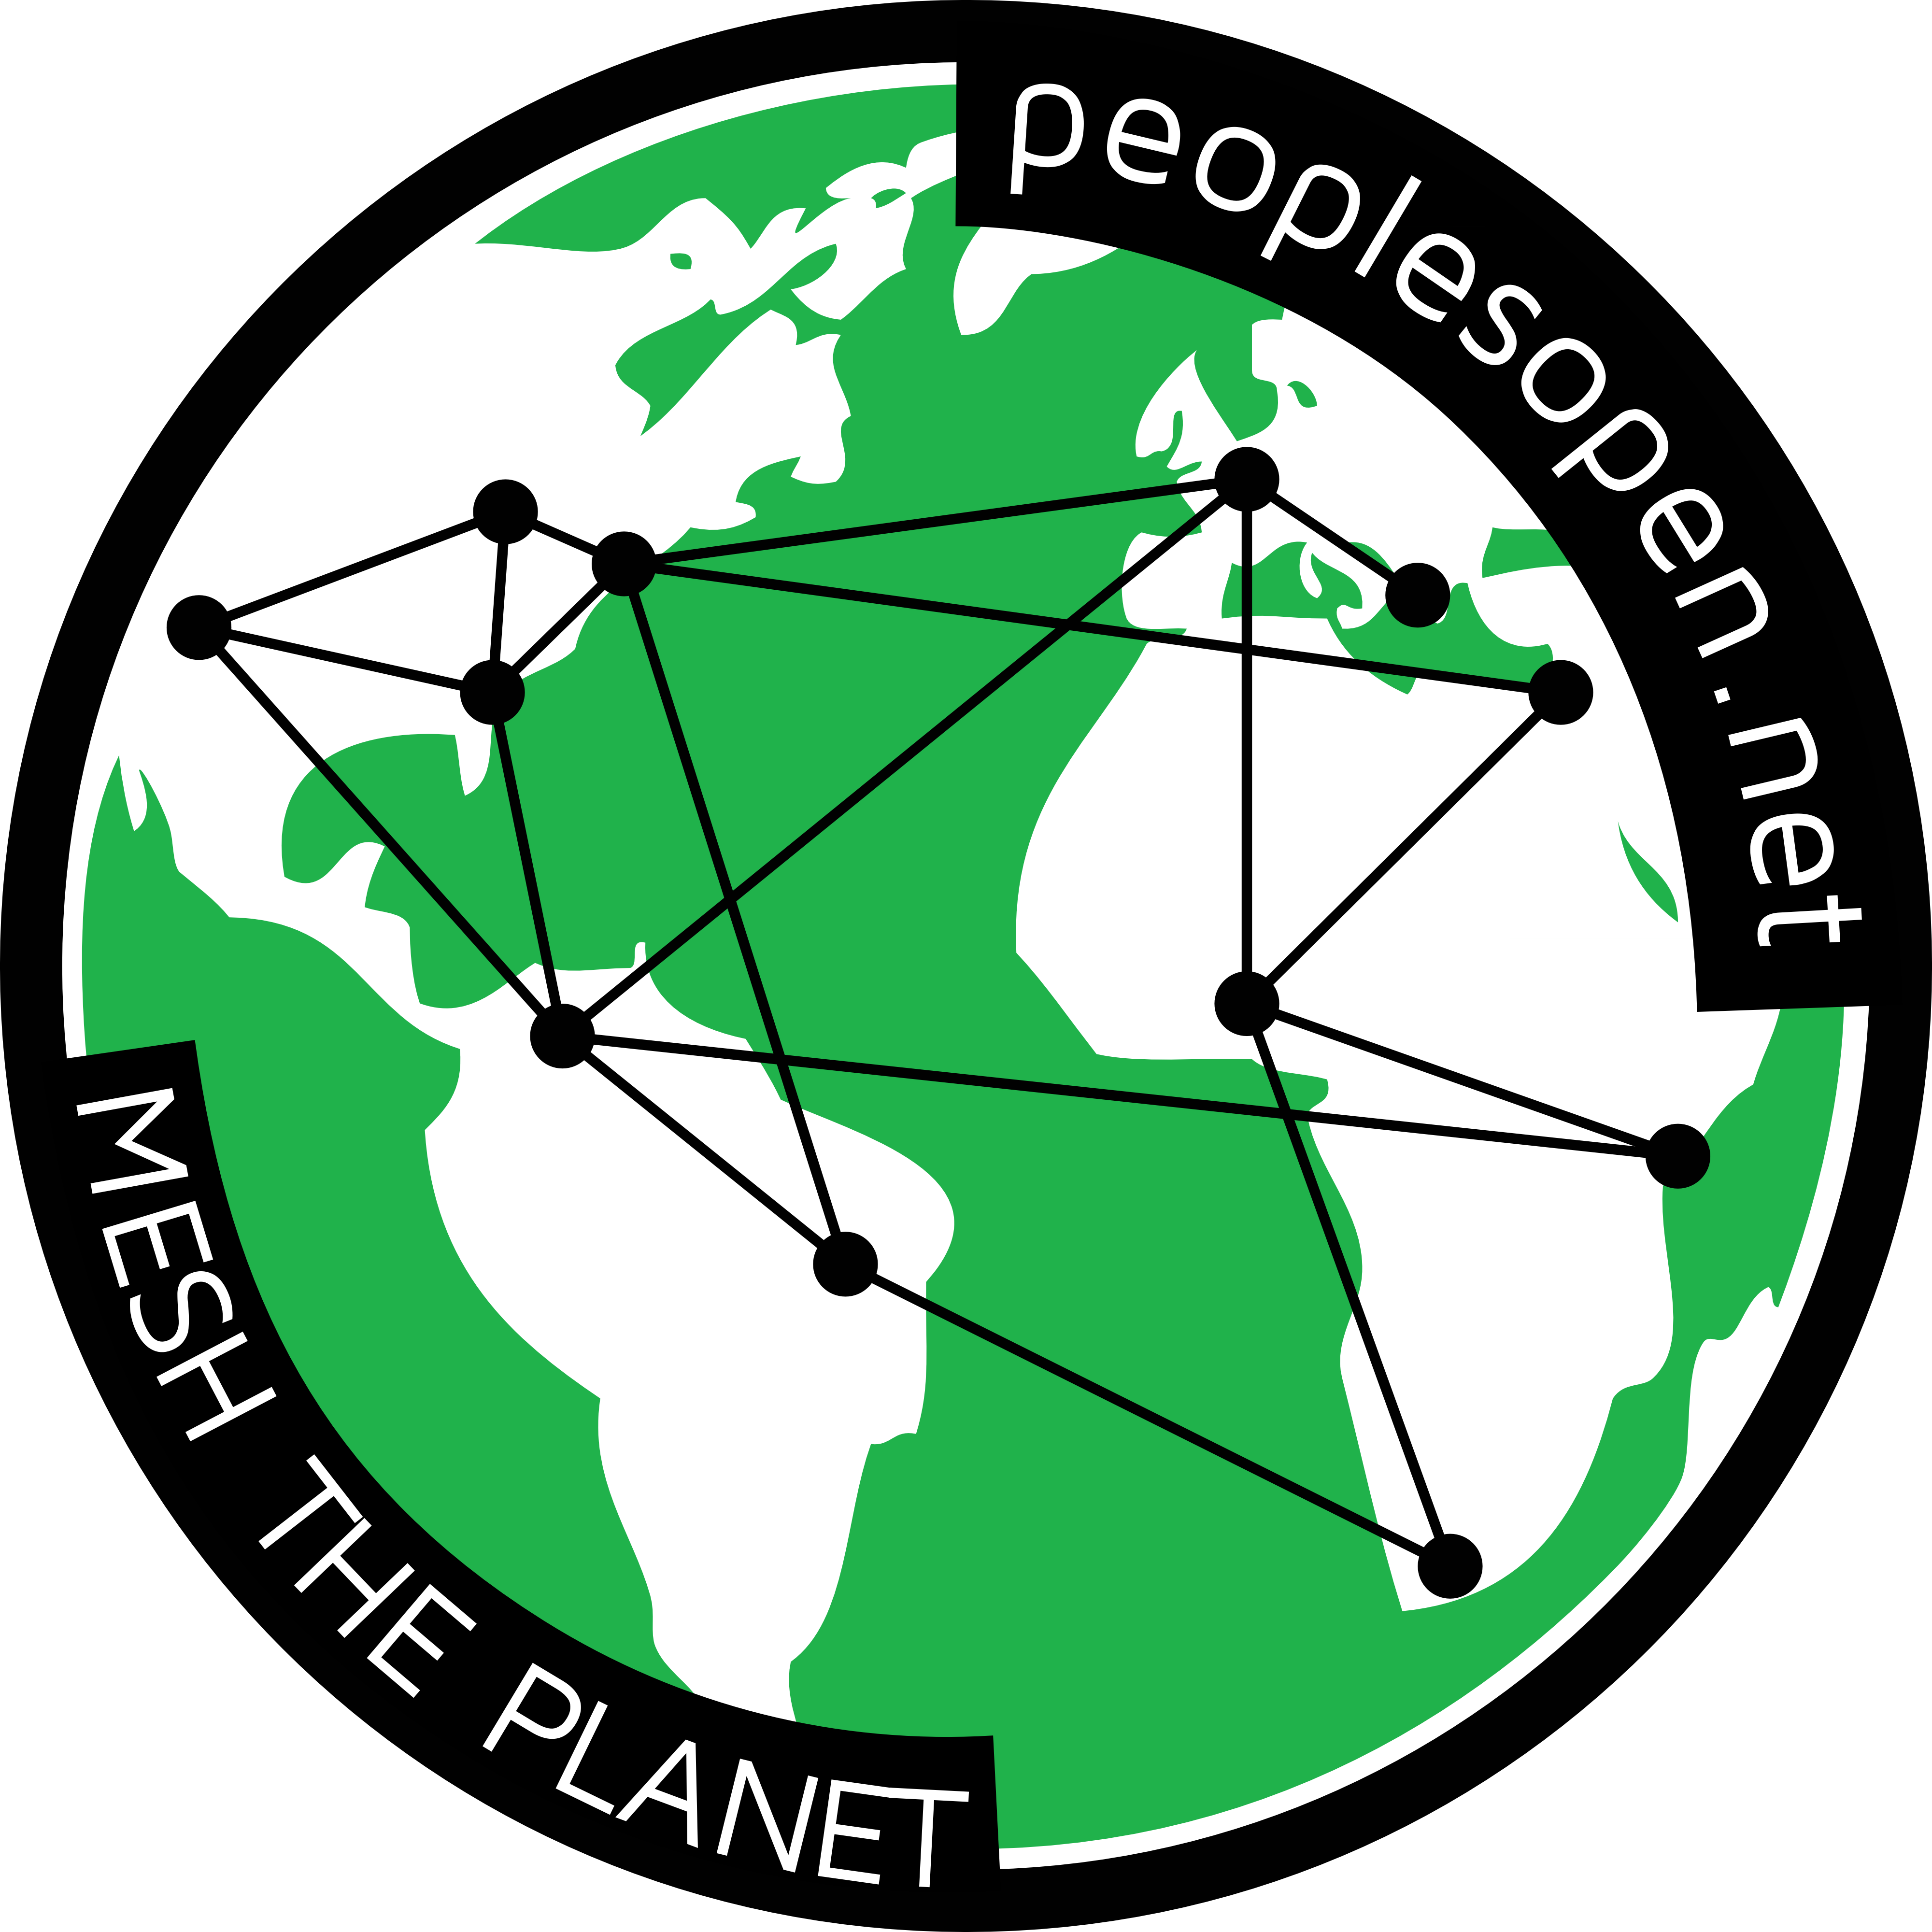 Peoplesopen.net sticker high res.png